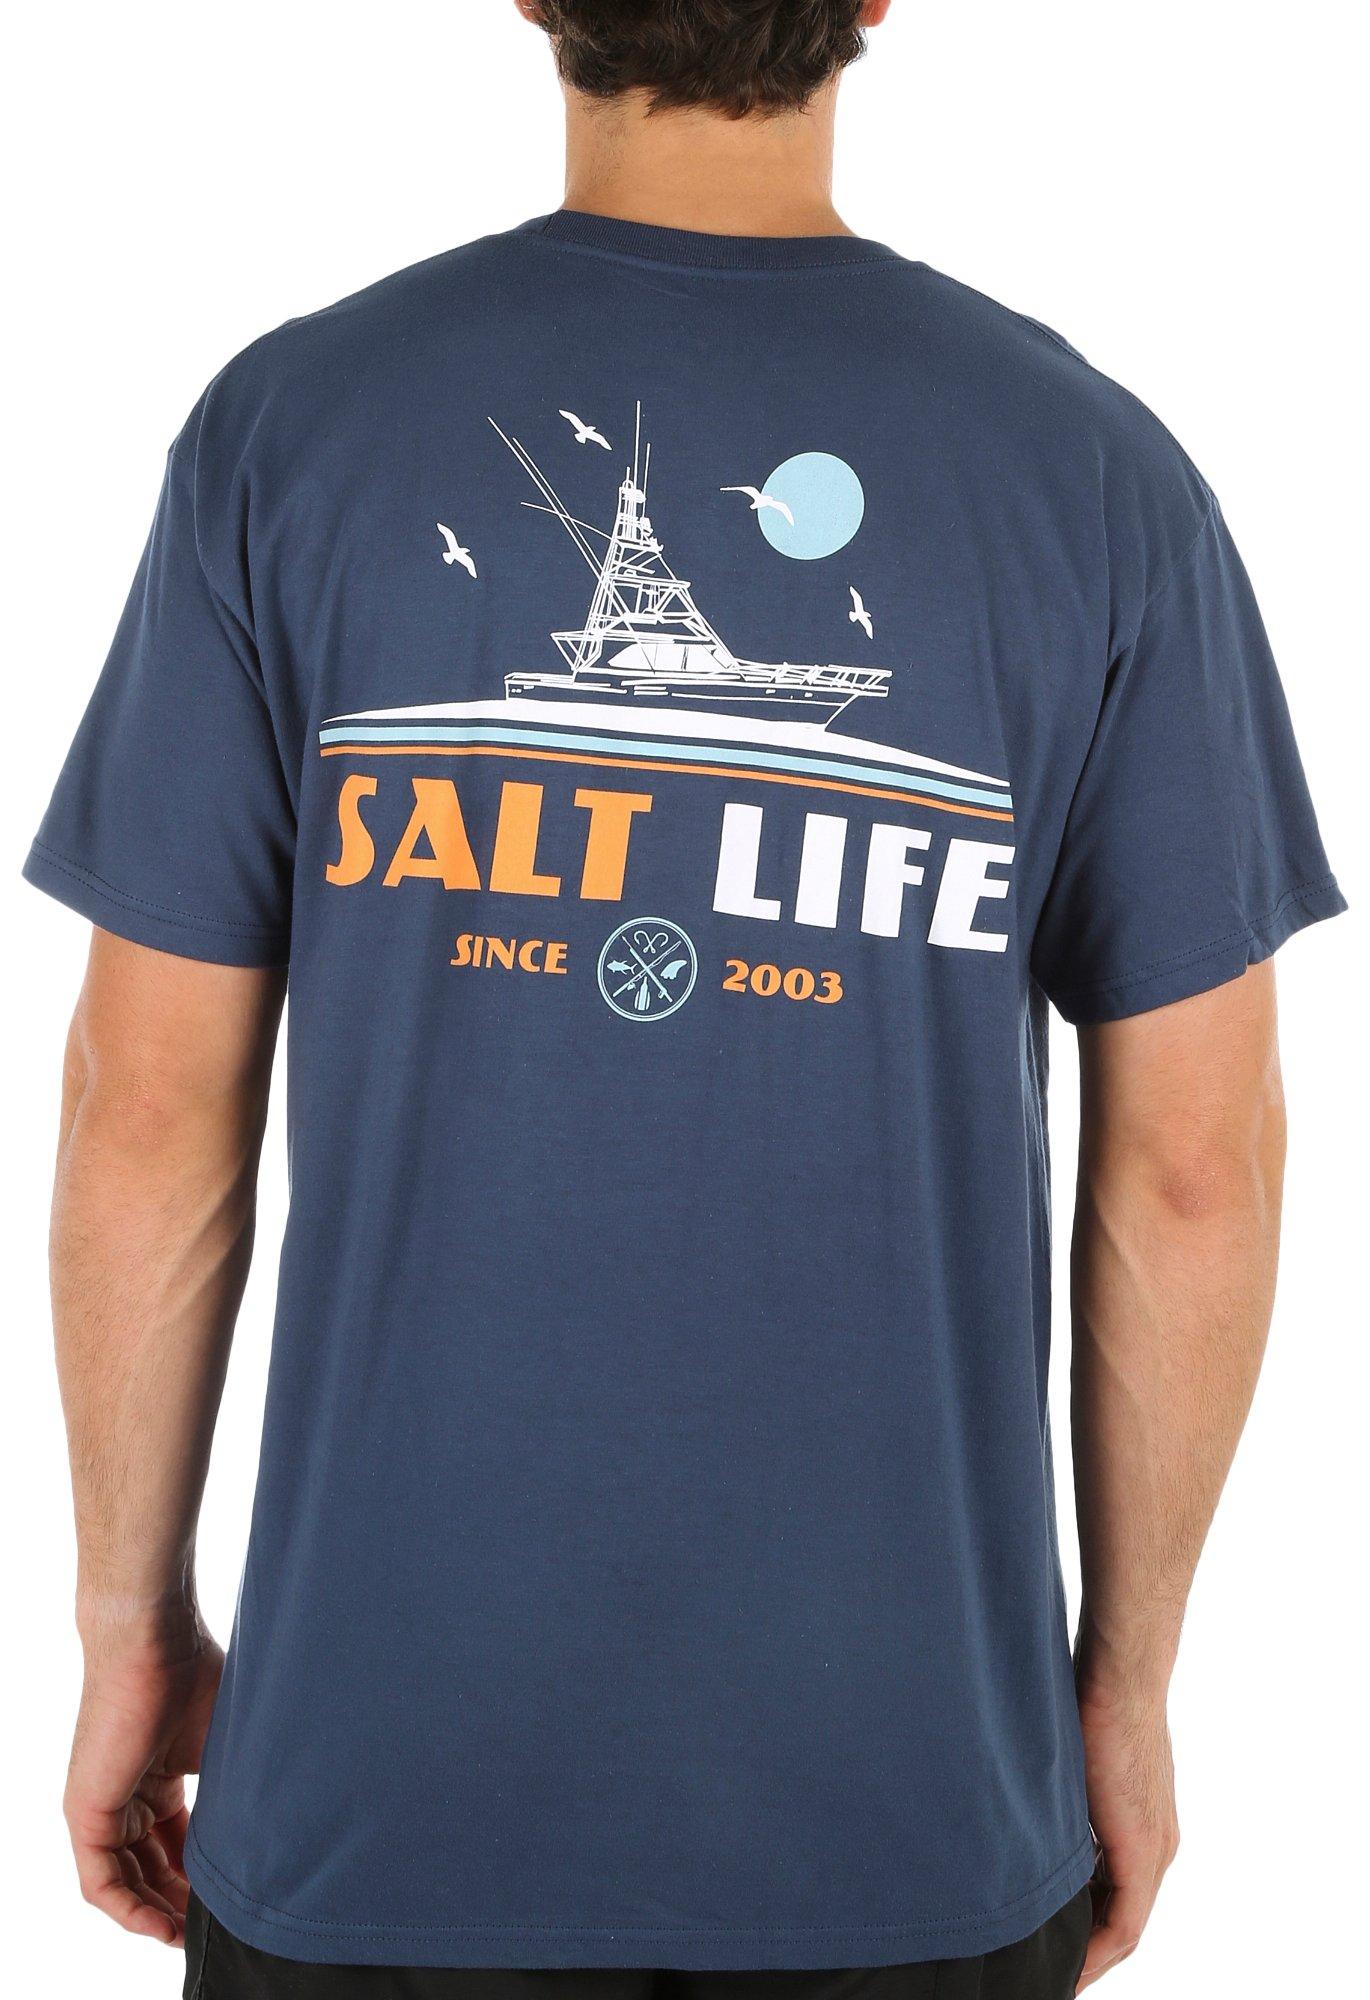 Salt Life Men's A Day in The Life T-Shirt, Medium, Washed Navy